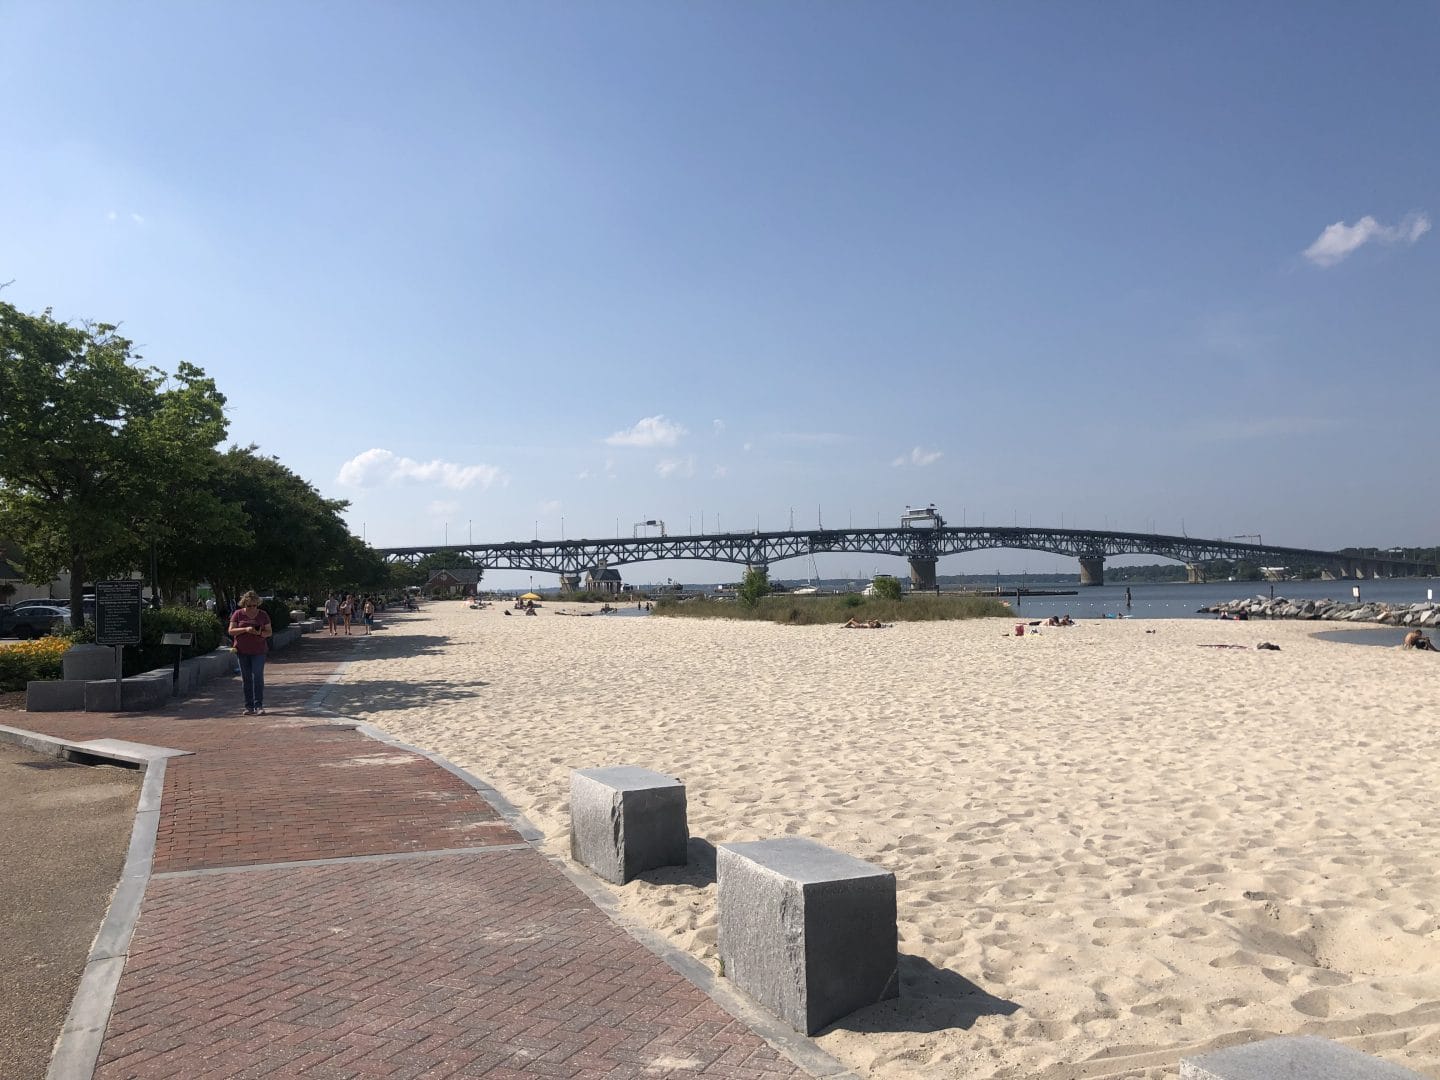 Yorktown victory monument and beach